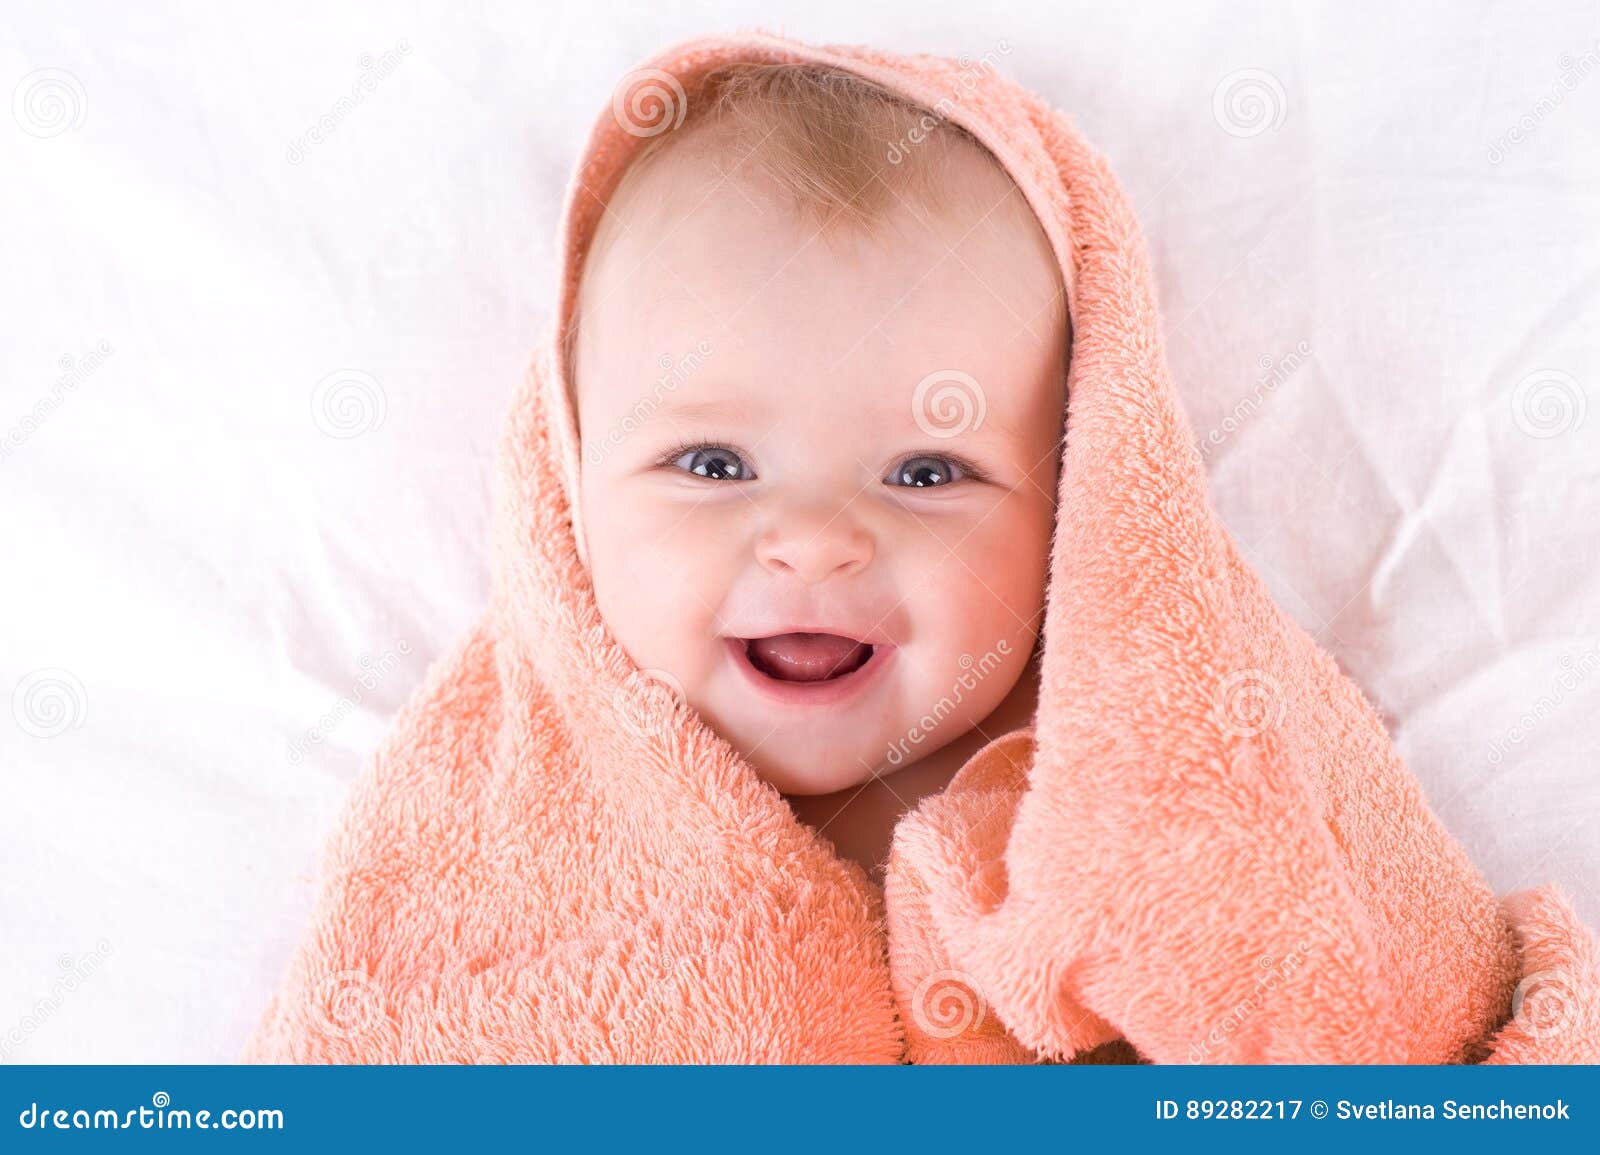 A cute baby wrapped in stock image. Image of infant, funny - 89282217